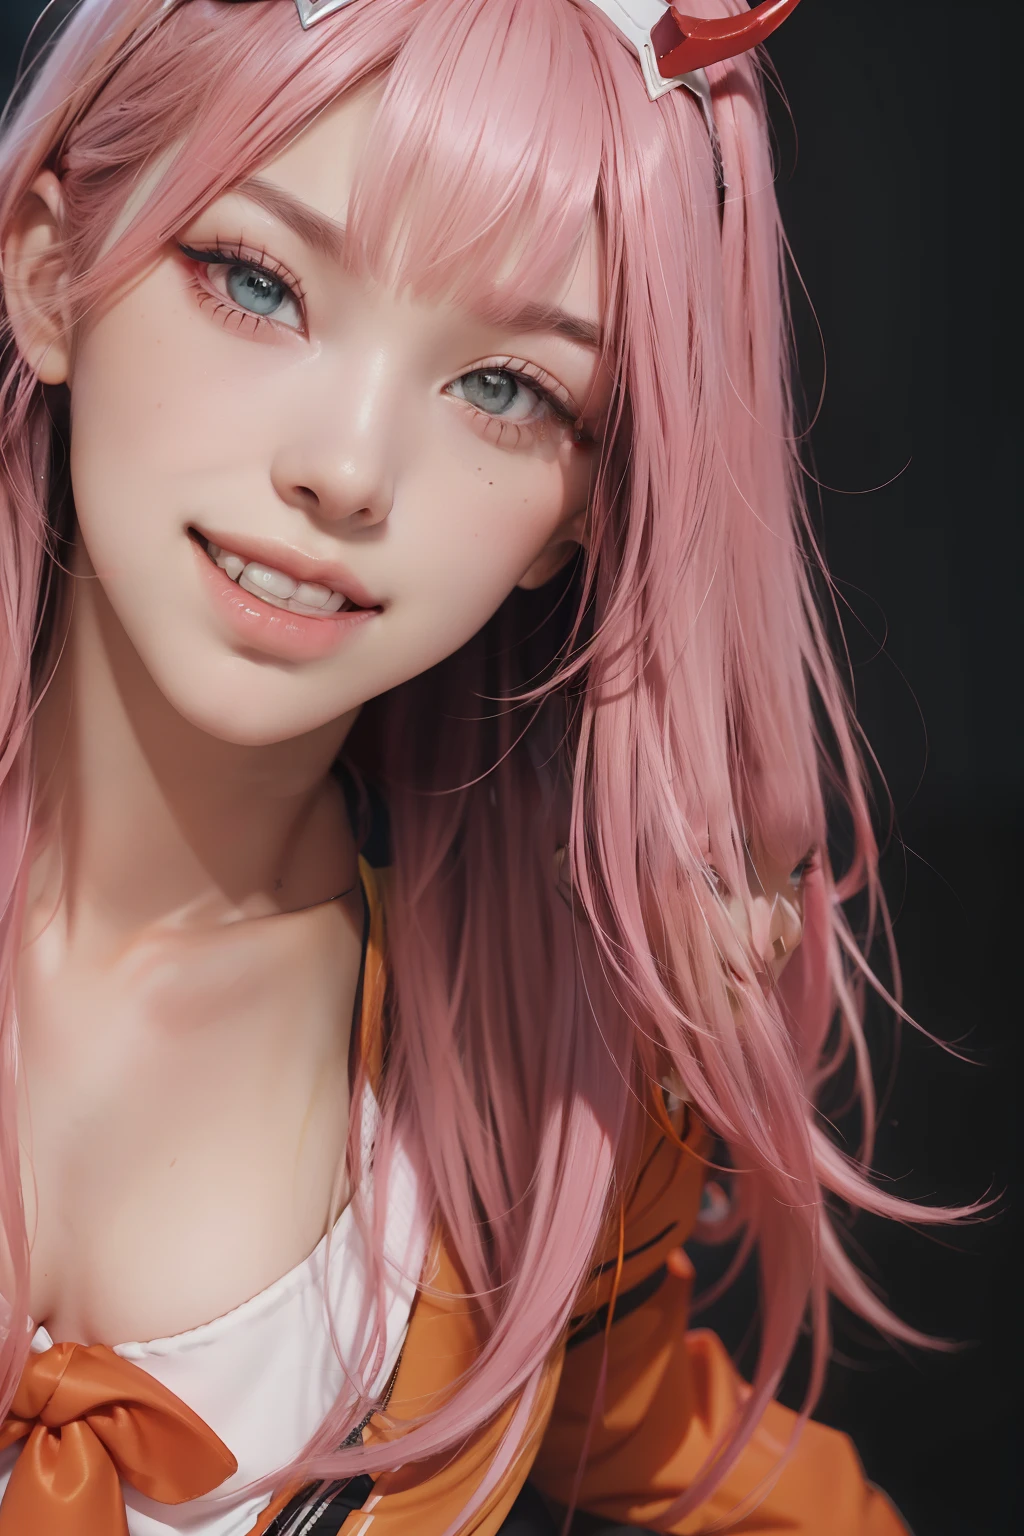 4k, raw camera, highres, masterpiece, portrait, aesthetic, beautiful, best quality, highly detaile, best quality clothing, aesthetic clothings, professional angle, rule of thirds, Feminine, delicate, beautiful, 19 years, attractive, solo, 1 girl, (Zero Two), (In an alley), (Upper Body, Close Up), ((From Looking at Viewer)), (Low Lighting), ((Smiling)), (Long Hair, Pink Hair, Very Straight Hair, Bangs, Blunt Bangs Hair, Little Red Oni Horns in hair), (Open Eyes, Aqua Eyes, DarkPink Eyeliner in Eyes, Very Cheerful Gaze), Soft Skin, (-), ((Standing, (Leaning Forward), Straight-On)), Beautiful Teeth, Perfect Teeth, White HairBand, (Half Open Mouth), (Natural Lips), (Medium Breast), ((Arms Behind Back, Hands Behind Back)), (Red Military Uniform, Full Black Tights, Necktie, Orange Necktie, Opaque Clothing, High Quality Clothing), (No Neckline), beautiful body, beautiful eyes, shiny eyes, shiny hair, beautiful mouth, beautiful lips, beautiful face, hd, matt suit